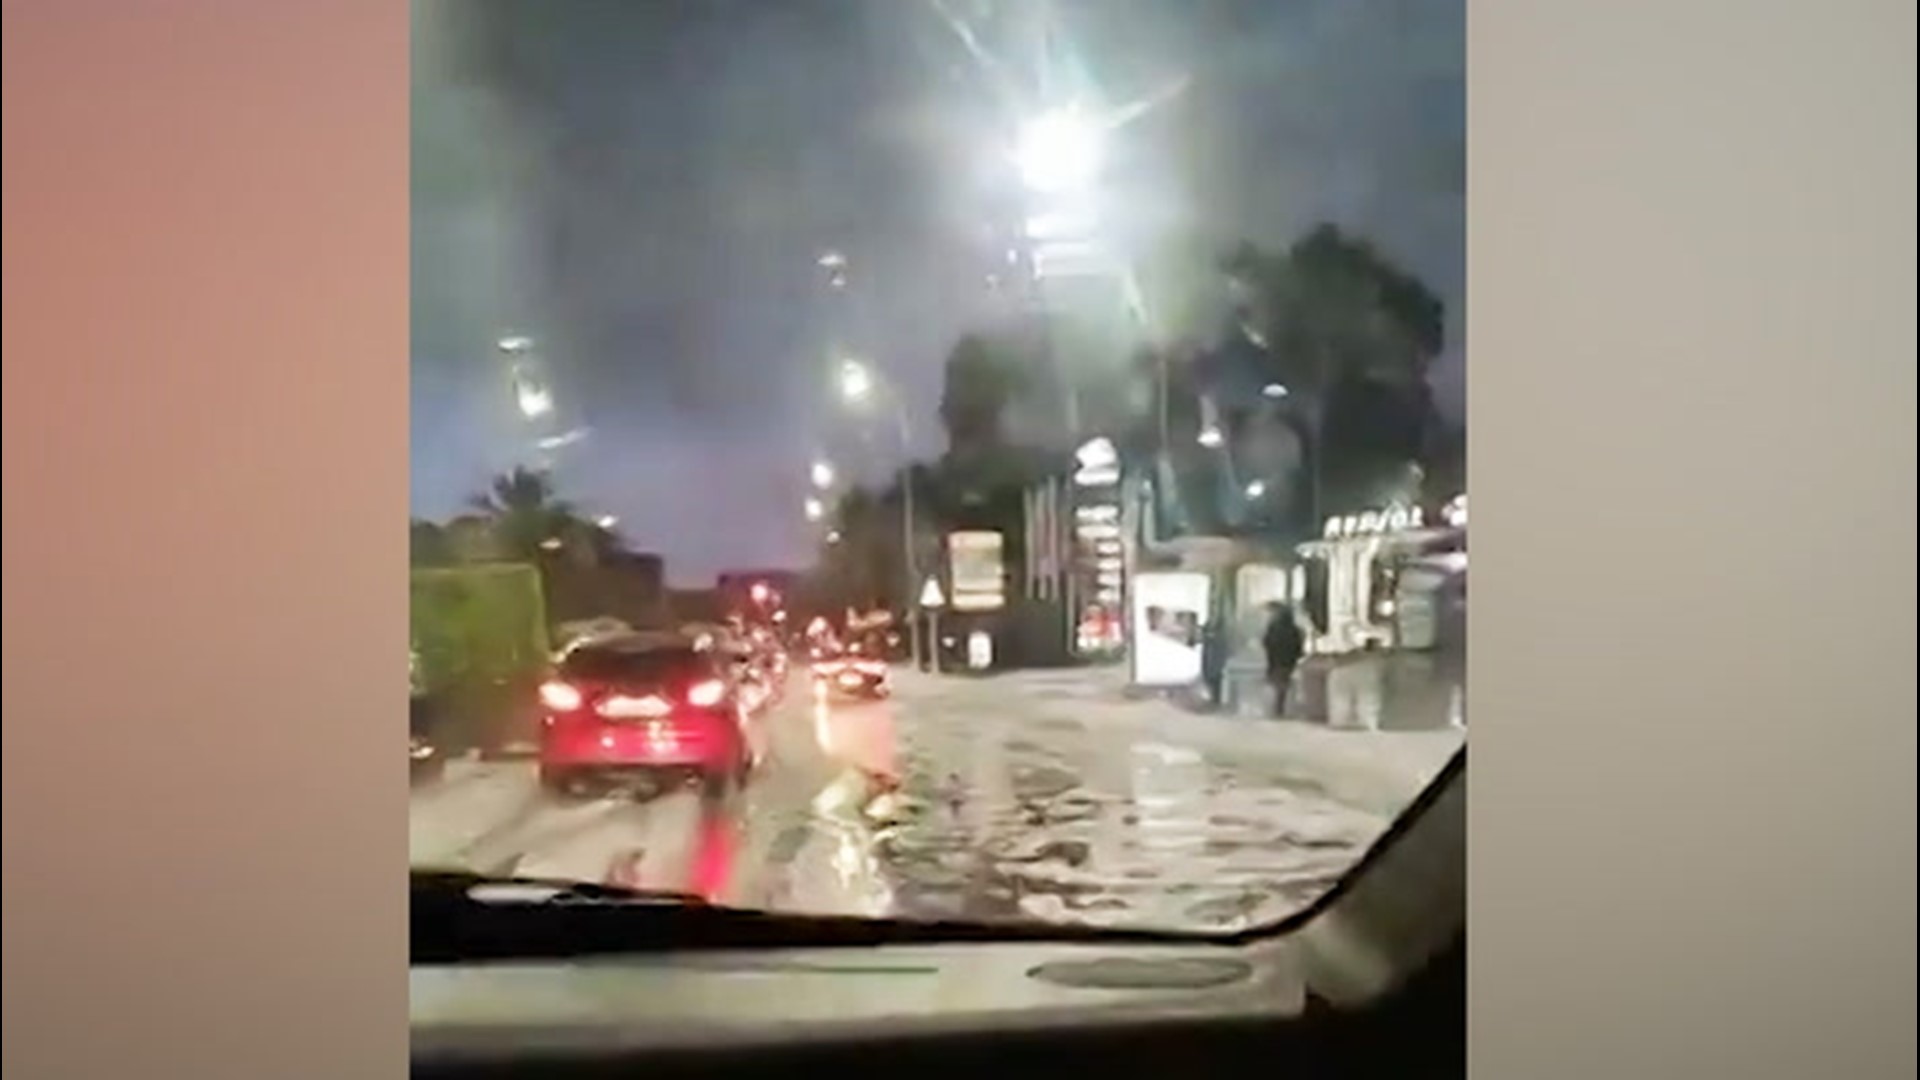 Residents of Malaga, Spain, woke up to see their streets covered in hailstones on Jan. 23.